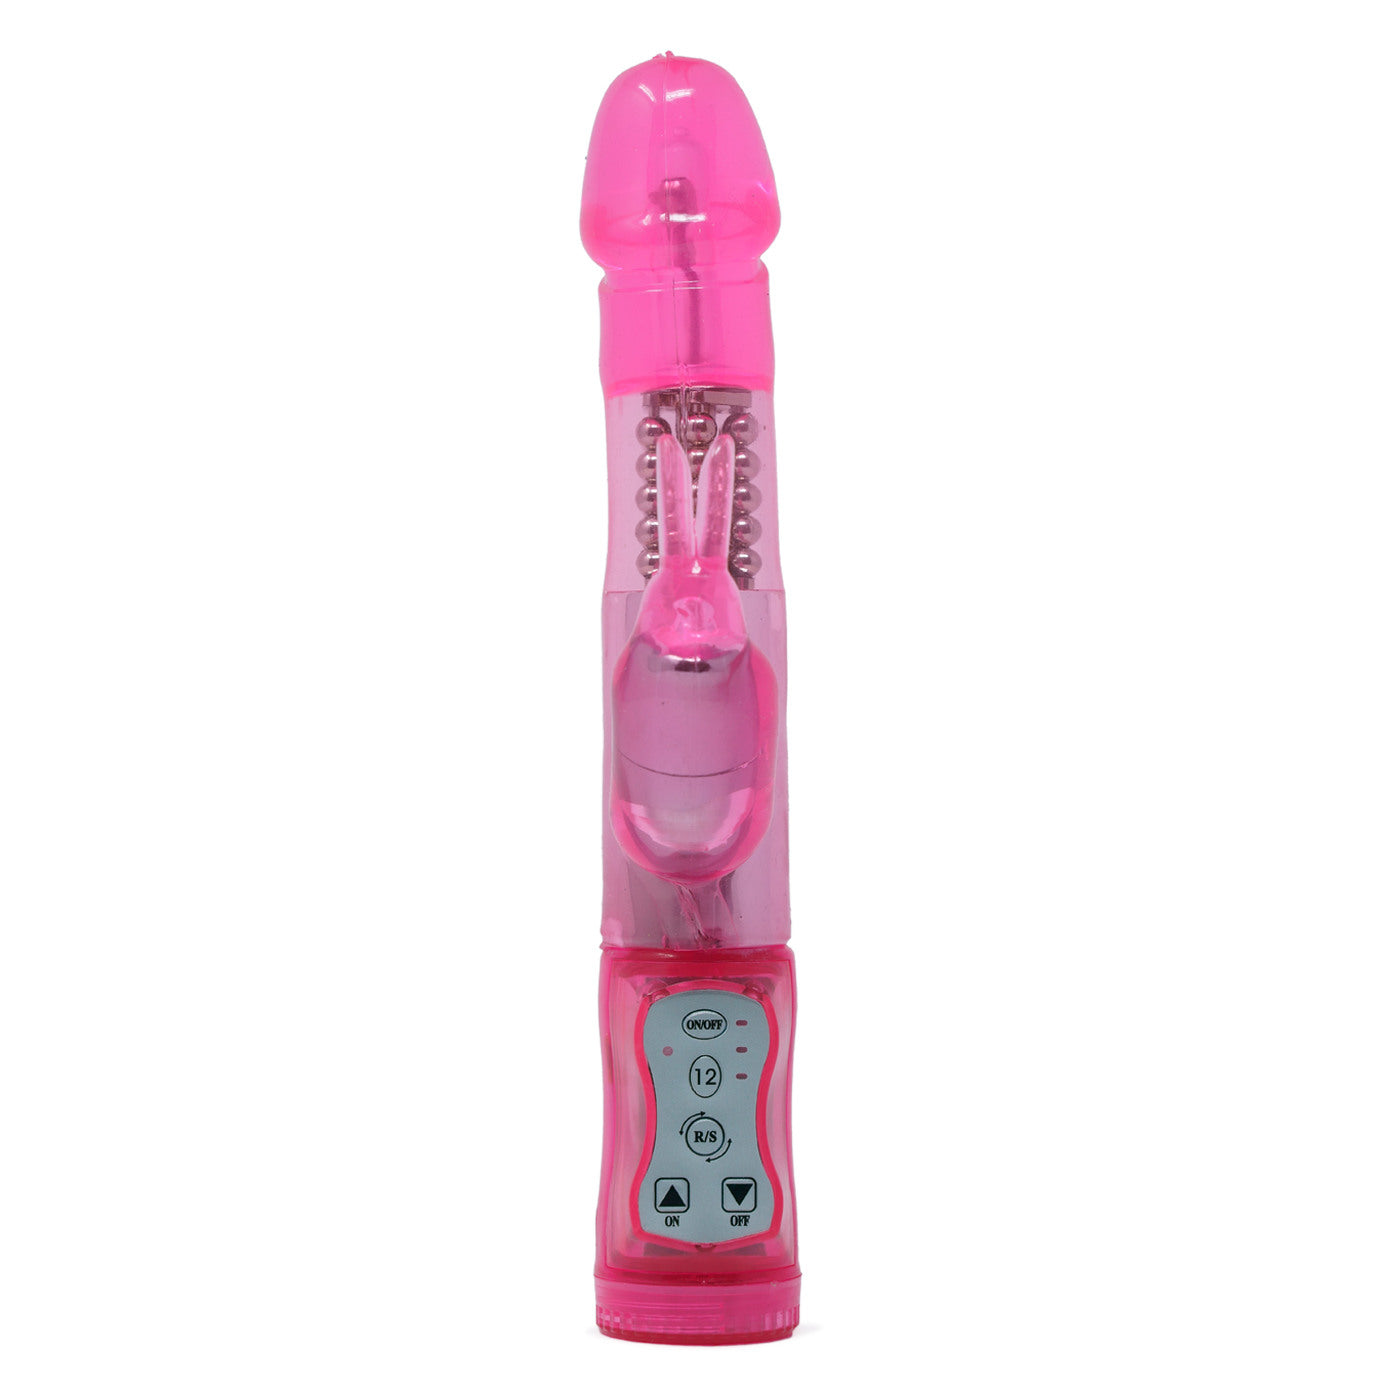 Double Delight 10 Function Rechargeable Rabbit Vibrator With Rotating Beads